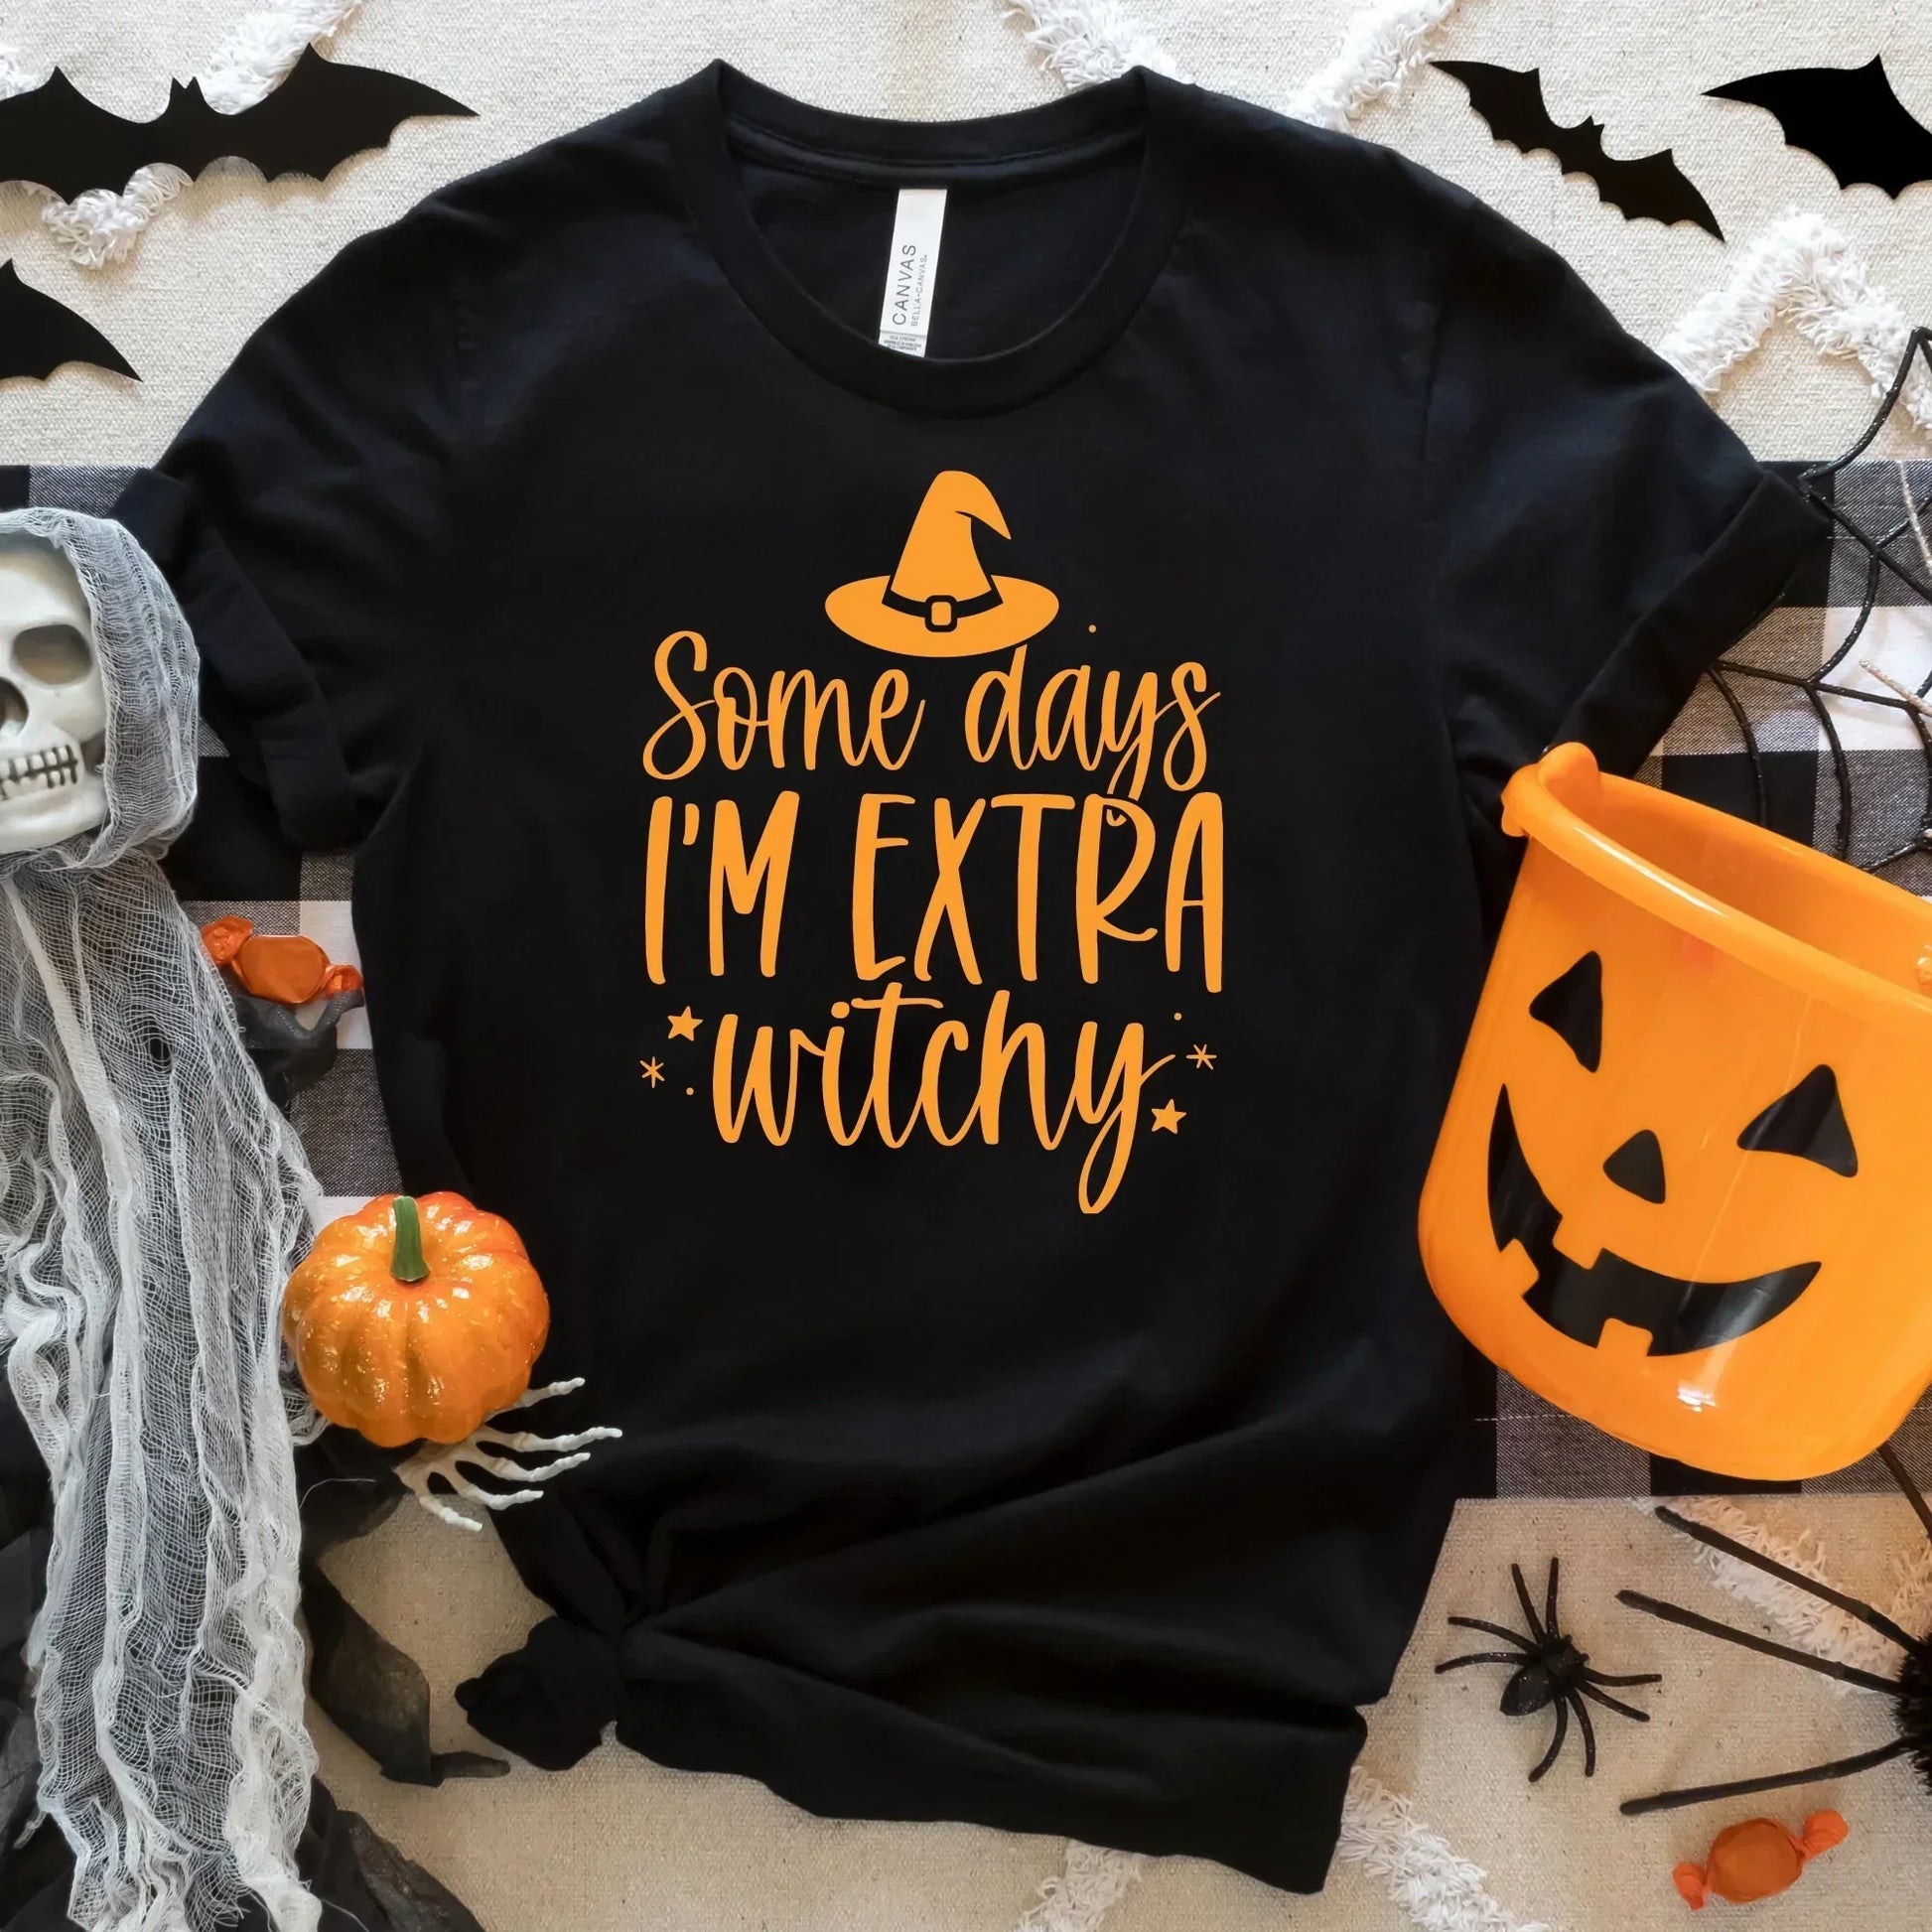 Halloween Sweatshirt, Extra Witchy woman, Witch Shirt, Halloween Crewneck, Funny Halloween Party, Cute Halloween Hoodie, Halloween Cat Shirt HMDesignStudioUS